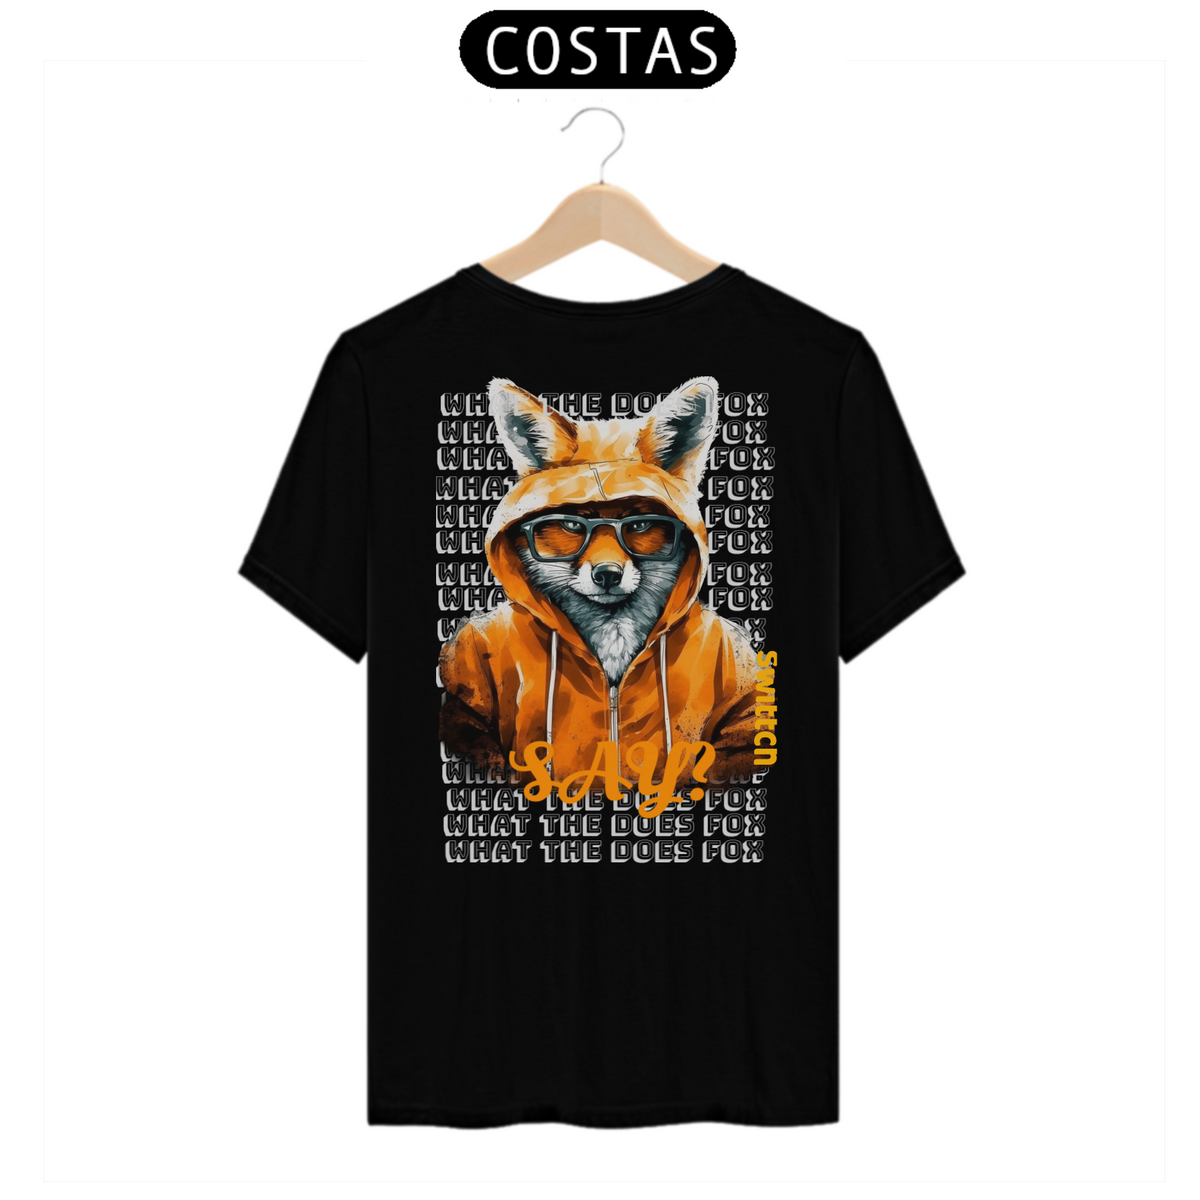 Nome do produto: T-shirt classic - What Does The Fox Say